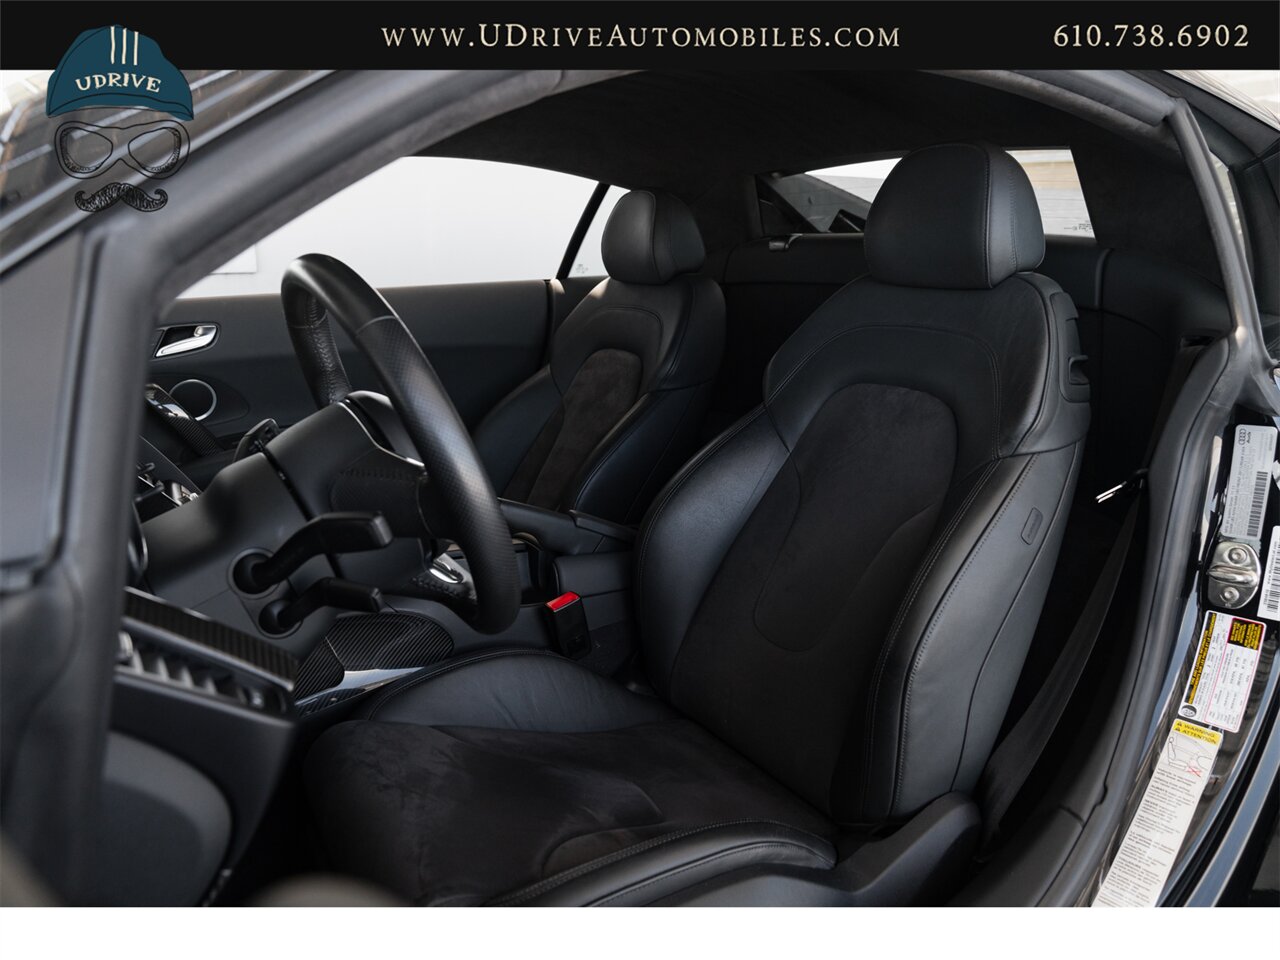 2012 Audi R8 4.2 Quattro  6 Speed Manual 1 Owner Service History - Photo 6 - West Chester, PA 19382